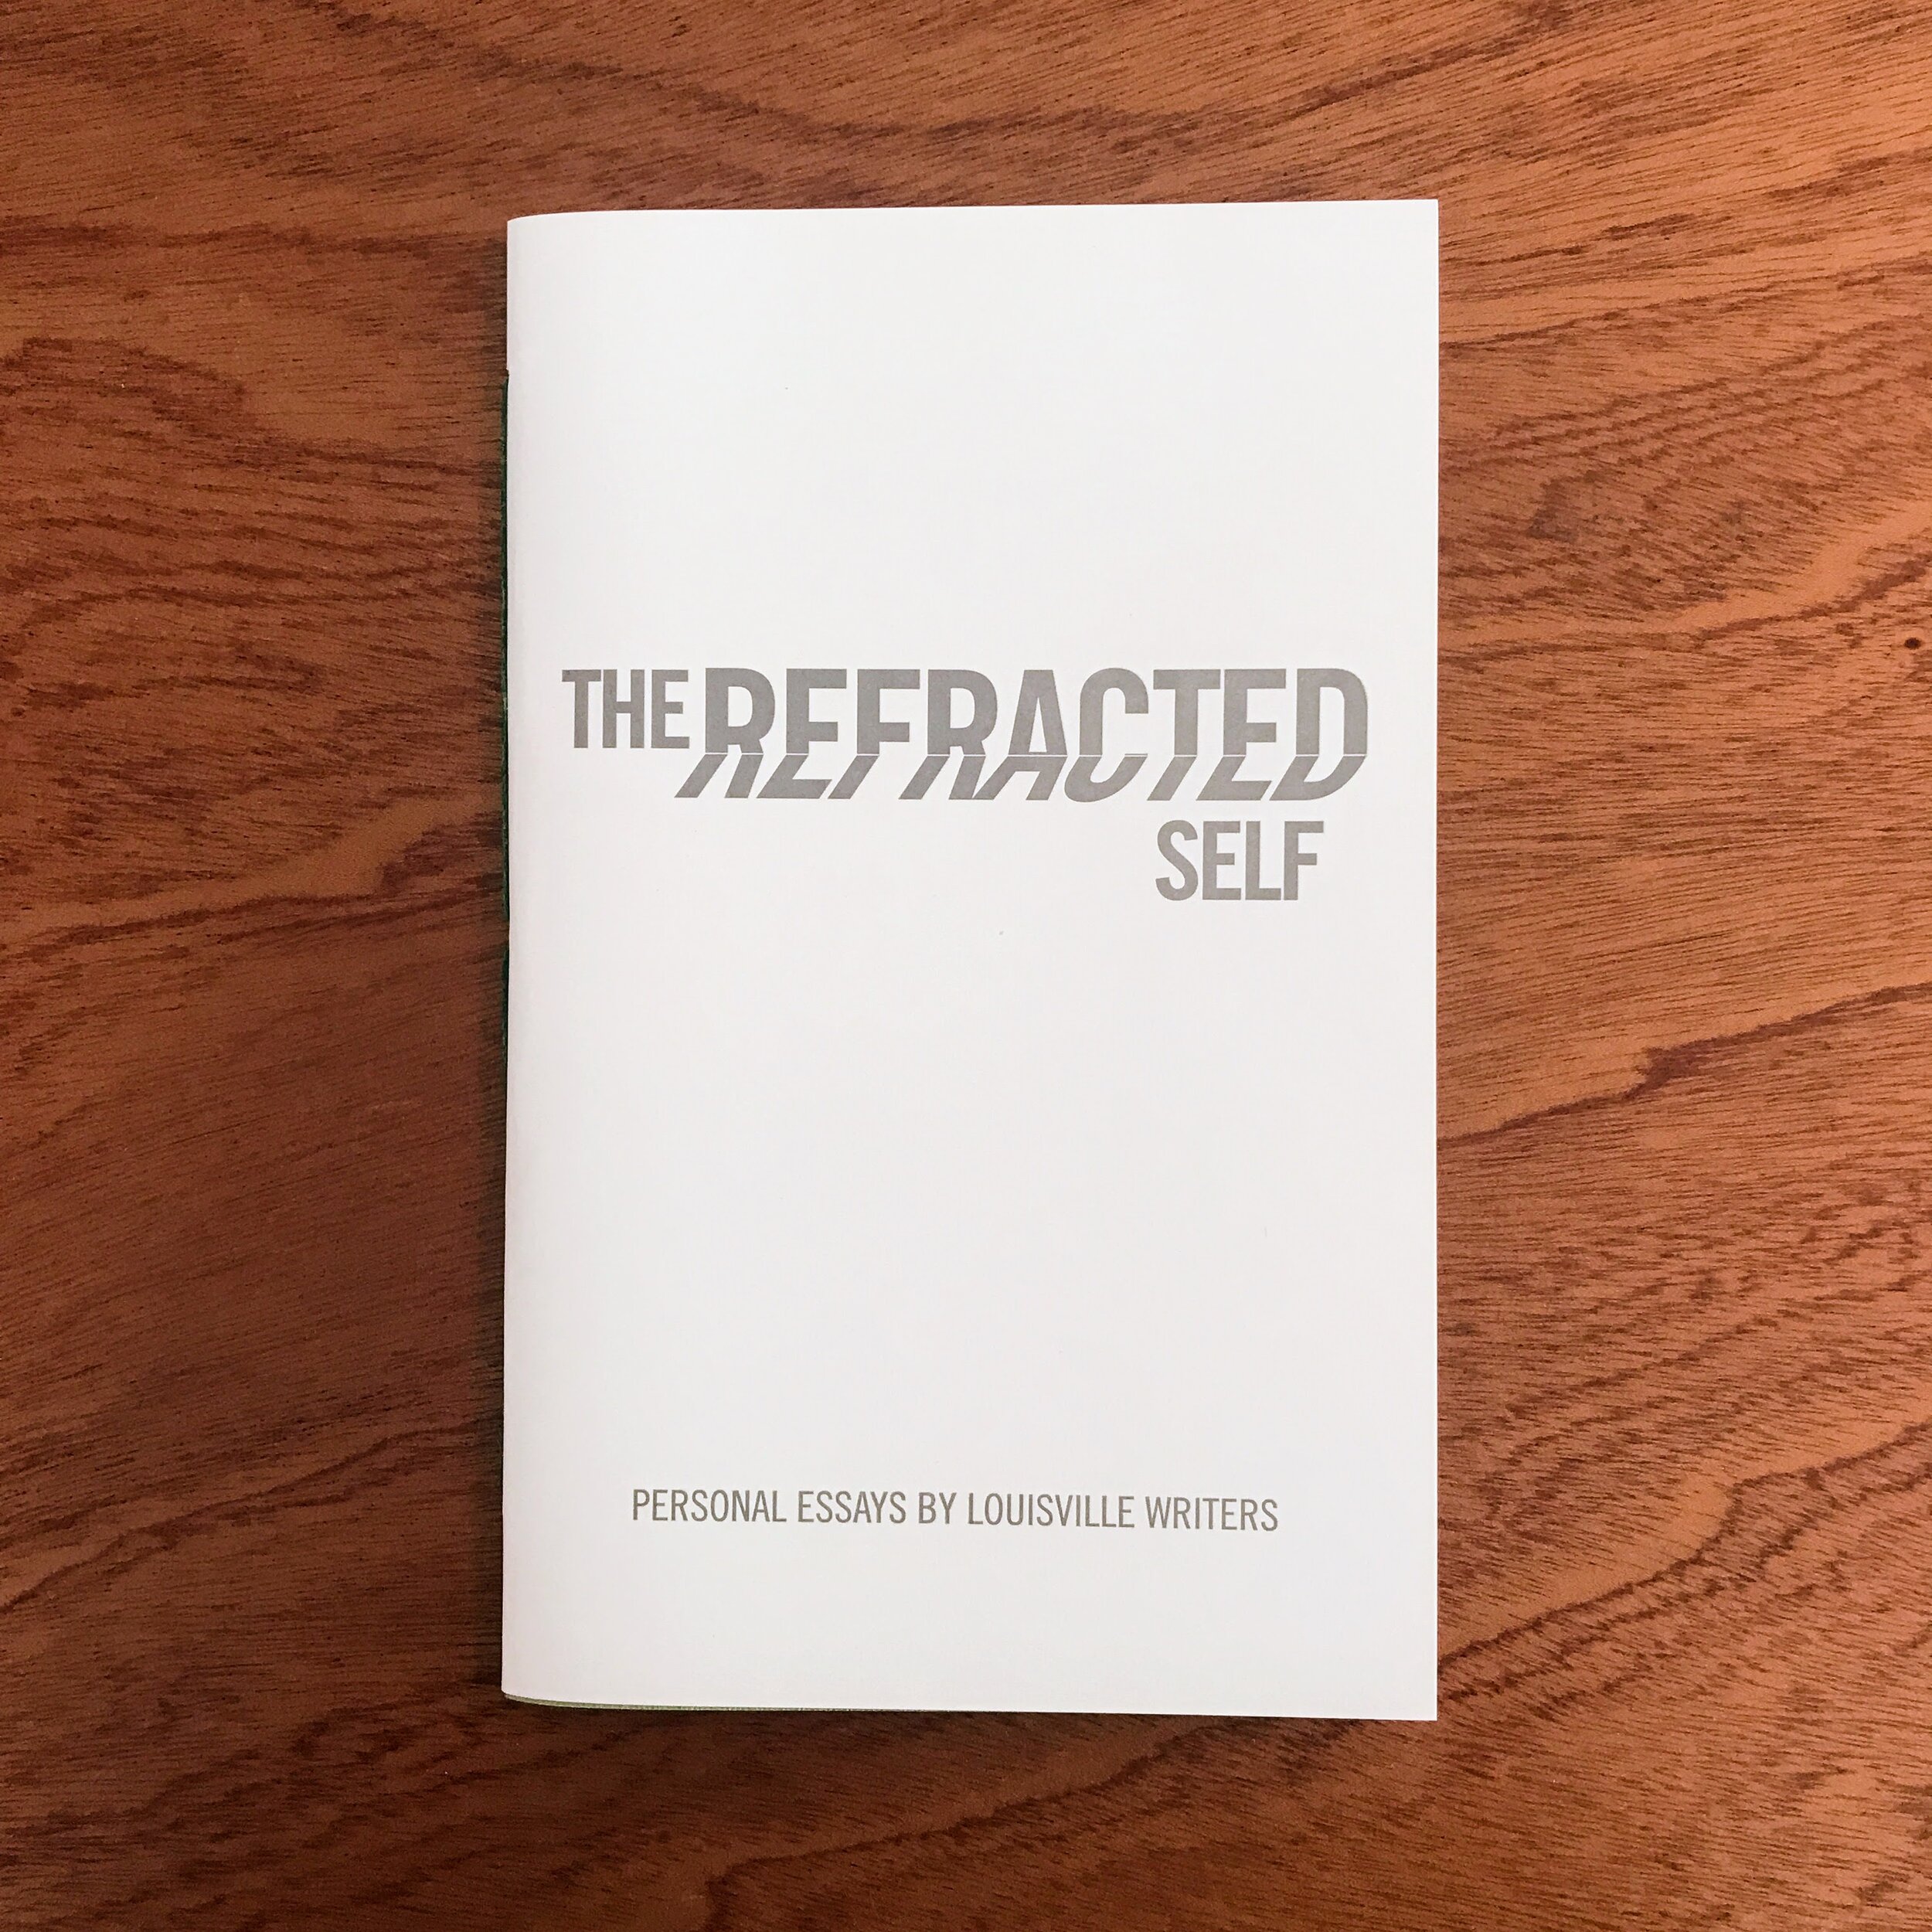 VOL. 13, THE REFRACTED SELF